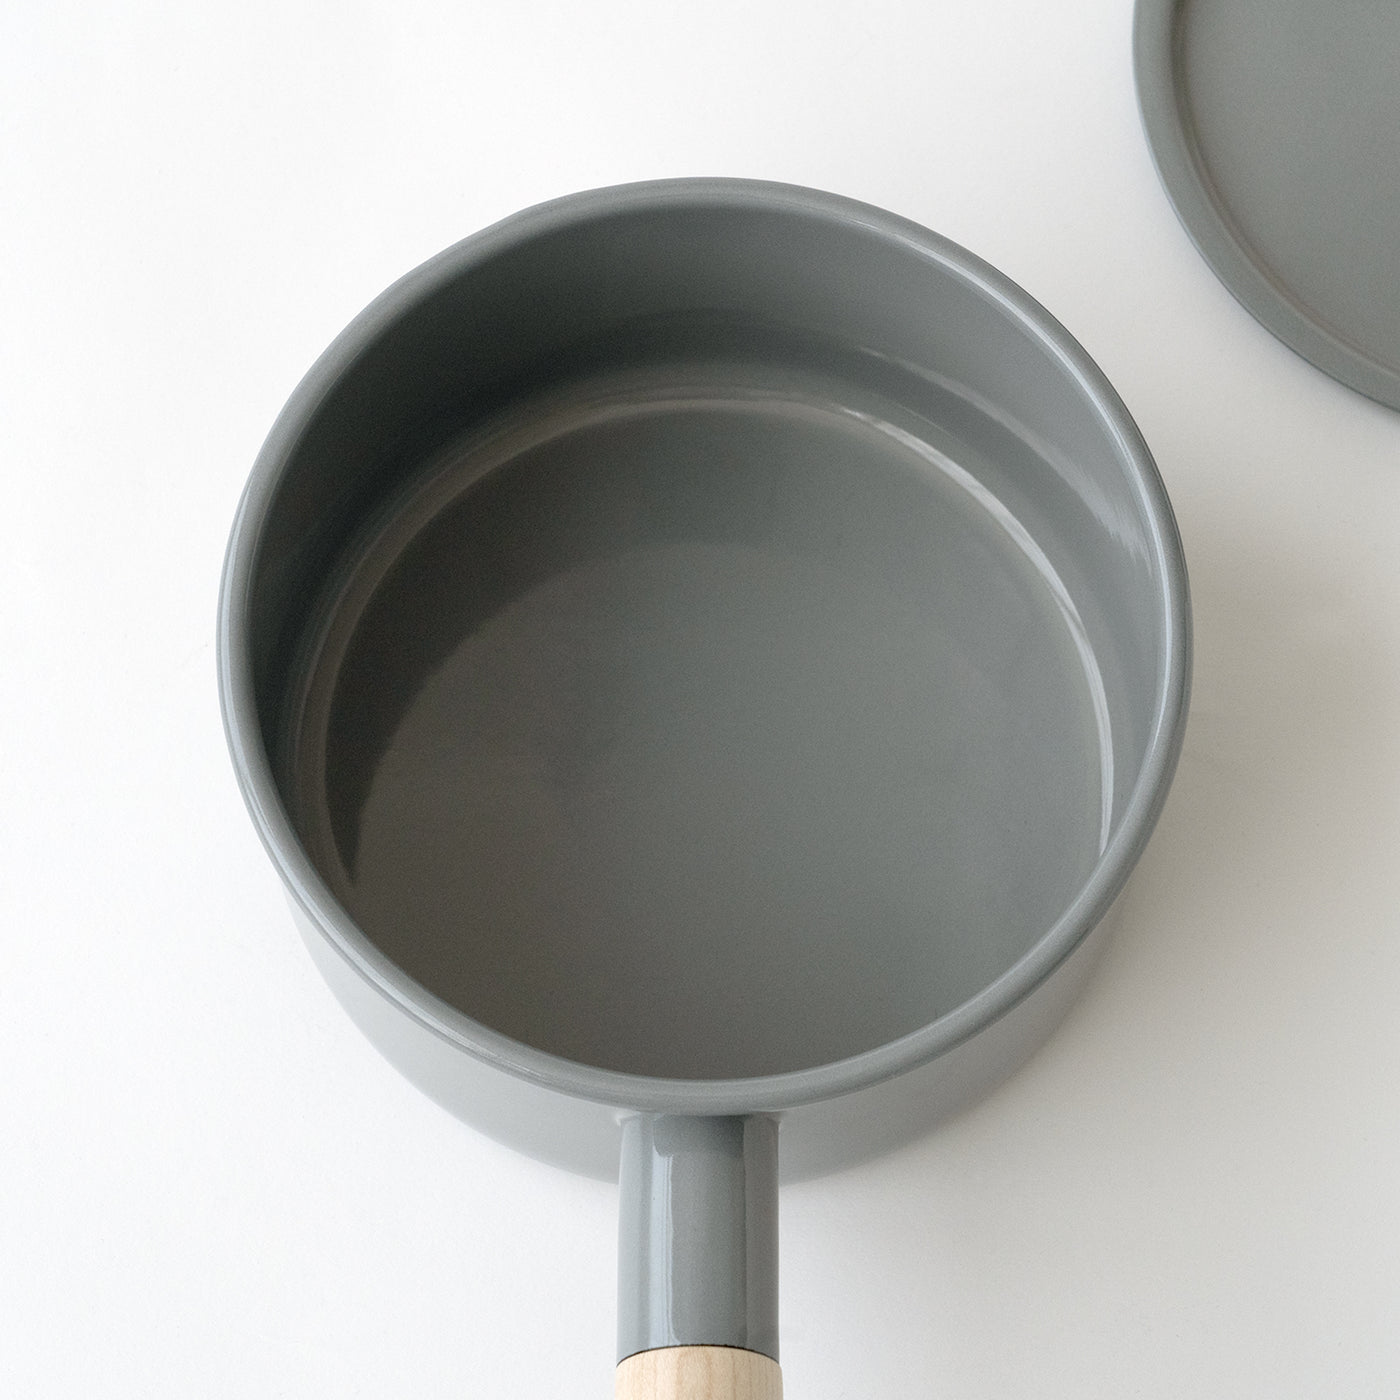 KAICO ENAMEL PAN WITH LID AND WOODEN HANDLE GRAY